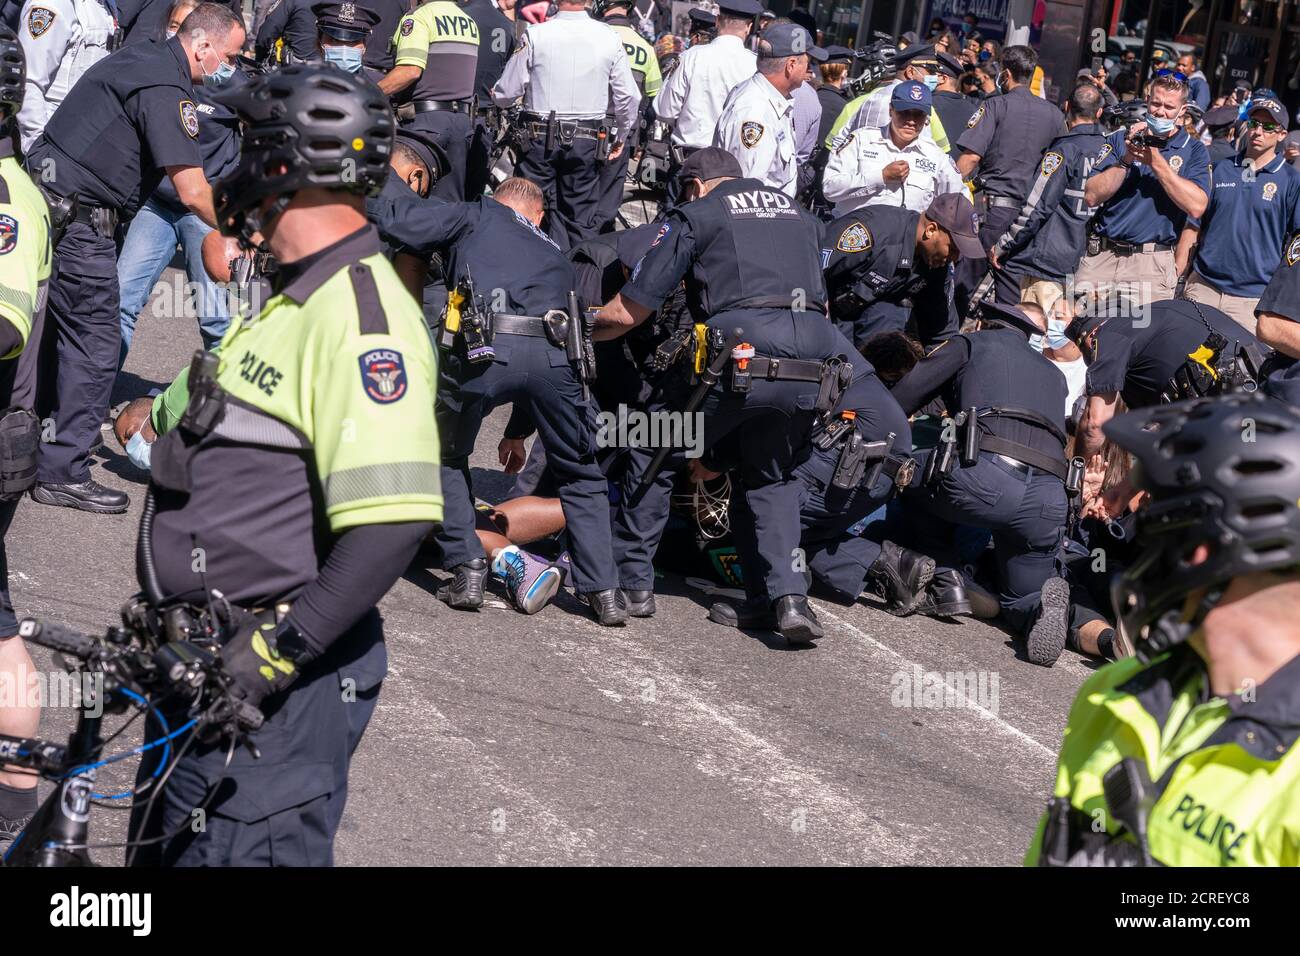 NEW YORK, NY - SEPTEMBER 19, 2020: Police arrest 86 people at a protest against the Immigration and Customs Enforcement agency (ICE) in Times Square. Stock Photo